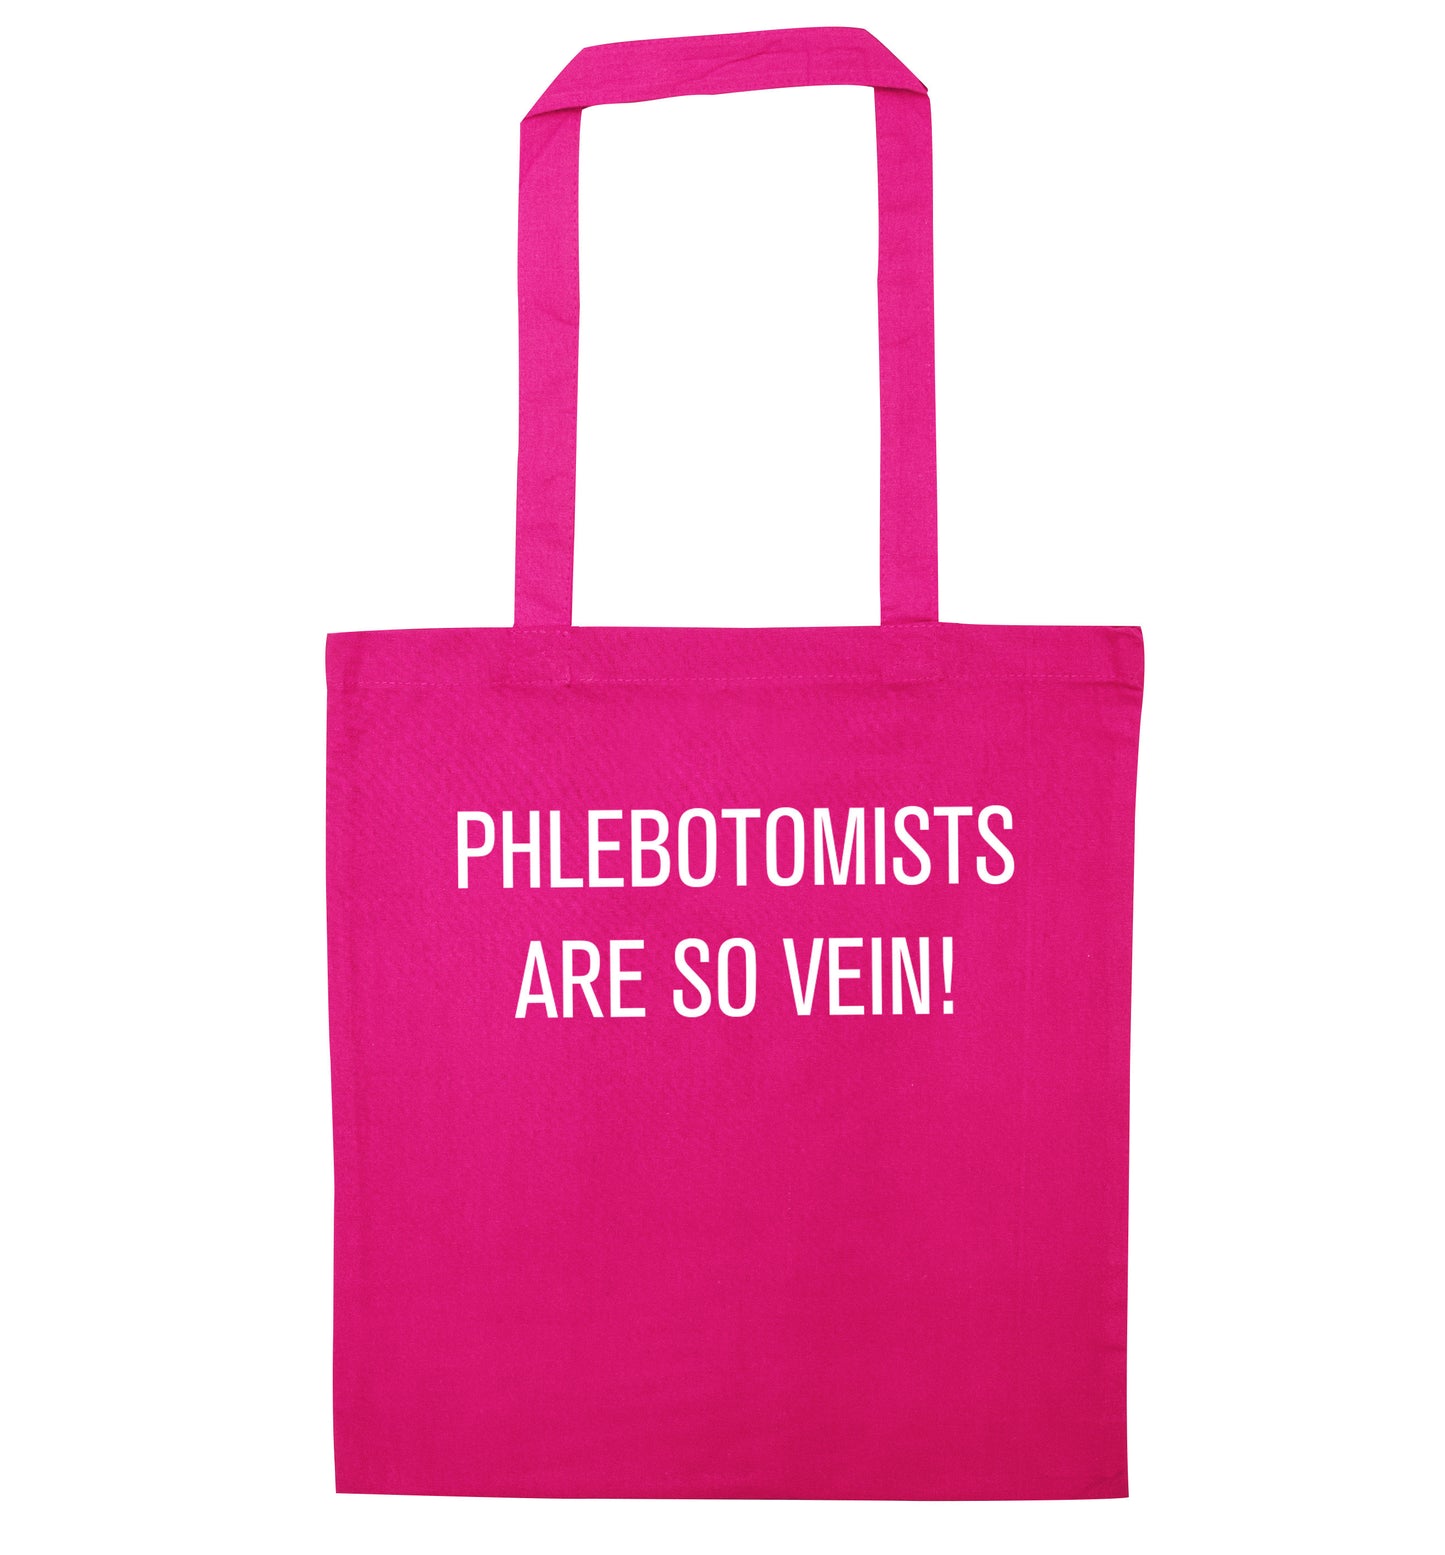 Phlebotomists are so vein! pink tote bag